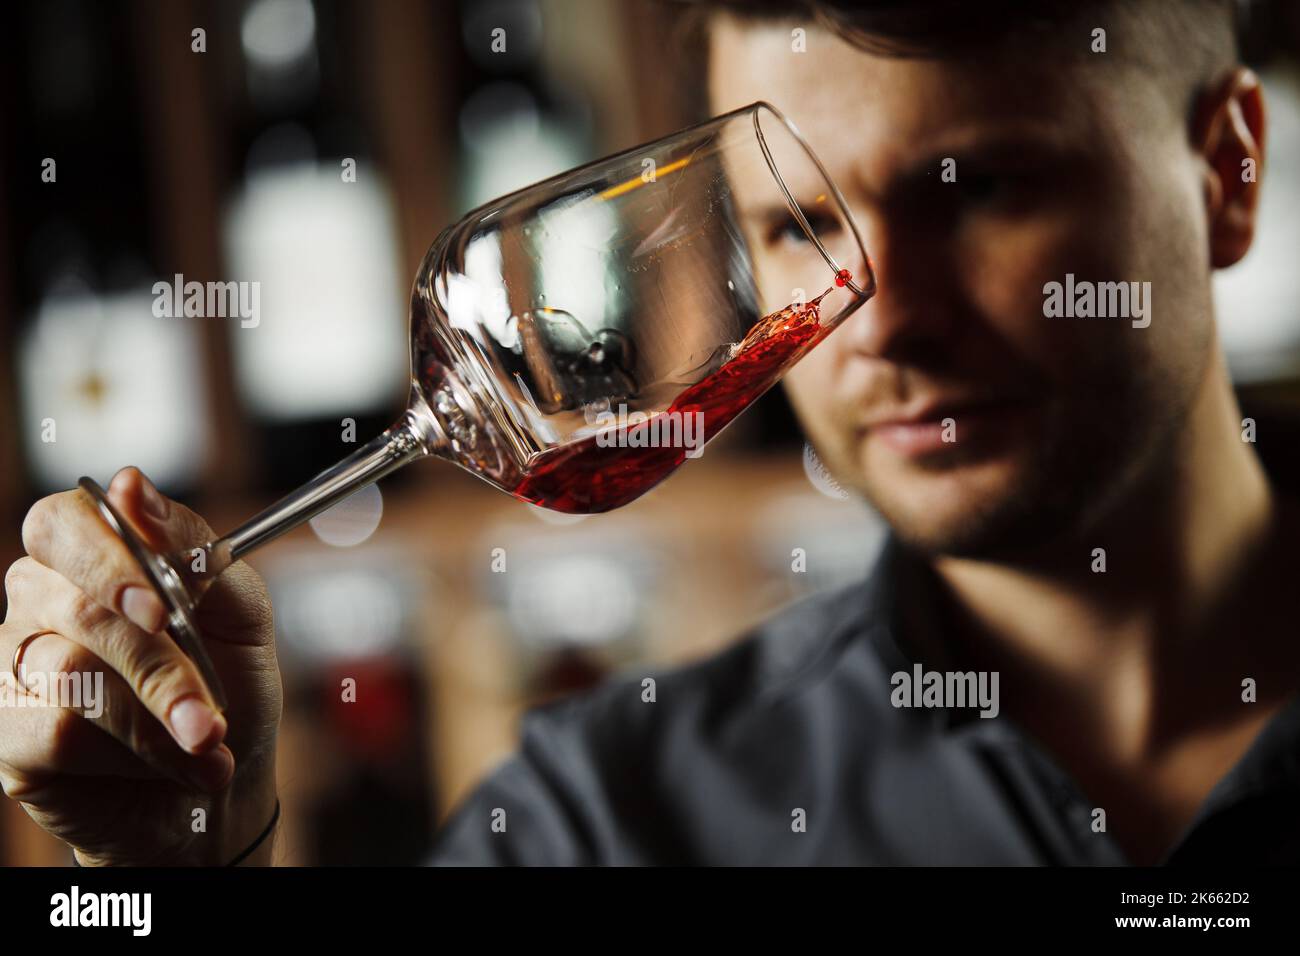 Bokal of red wine on background, male sommelier appreciating drink Stock Photo